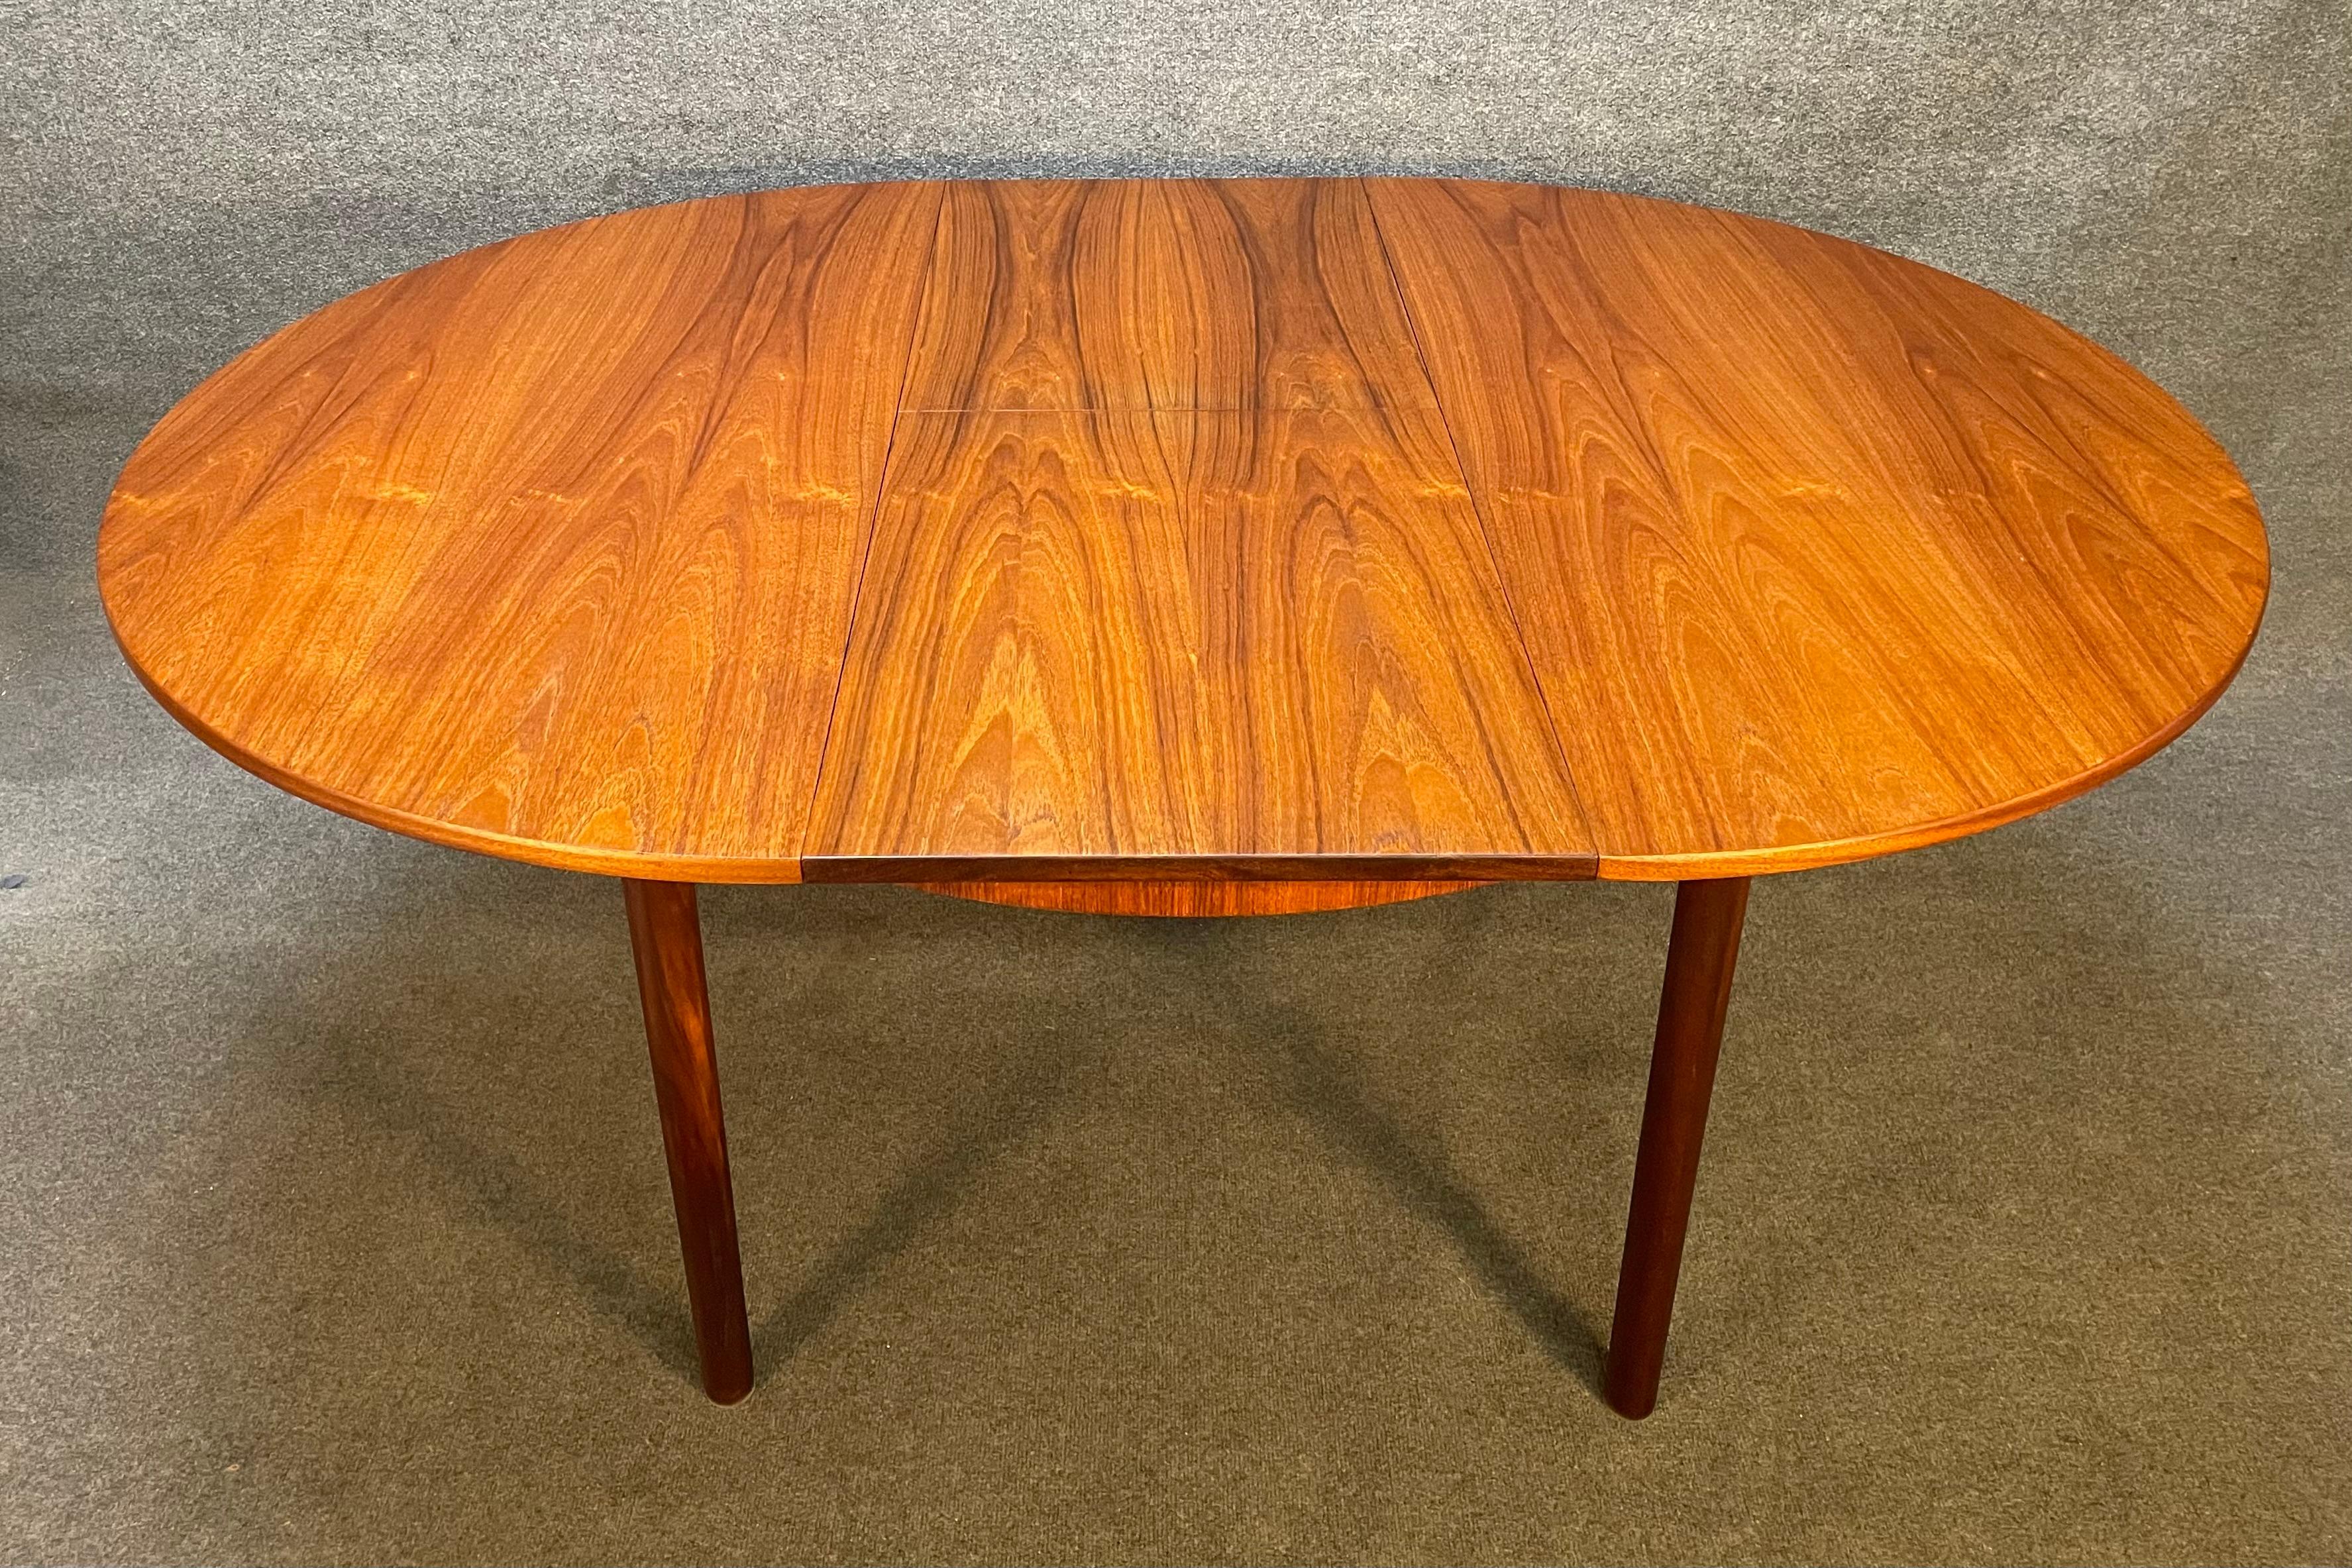 Here is a beautiful British Mid-Century Modern dining table in teak manufactured in Scotland in the 1960s by A.H McIntosh.
This table, recently imported from Europe to California before its refinishing, features a circular shape, a vibrant wood